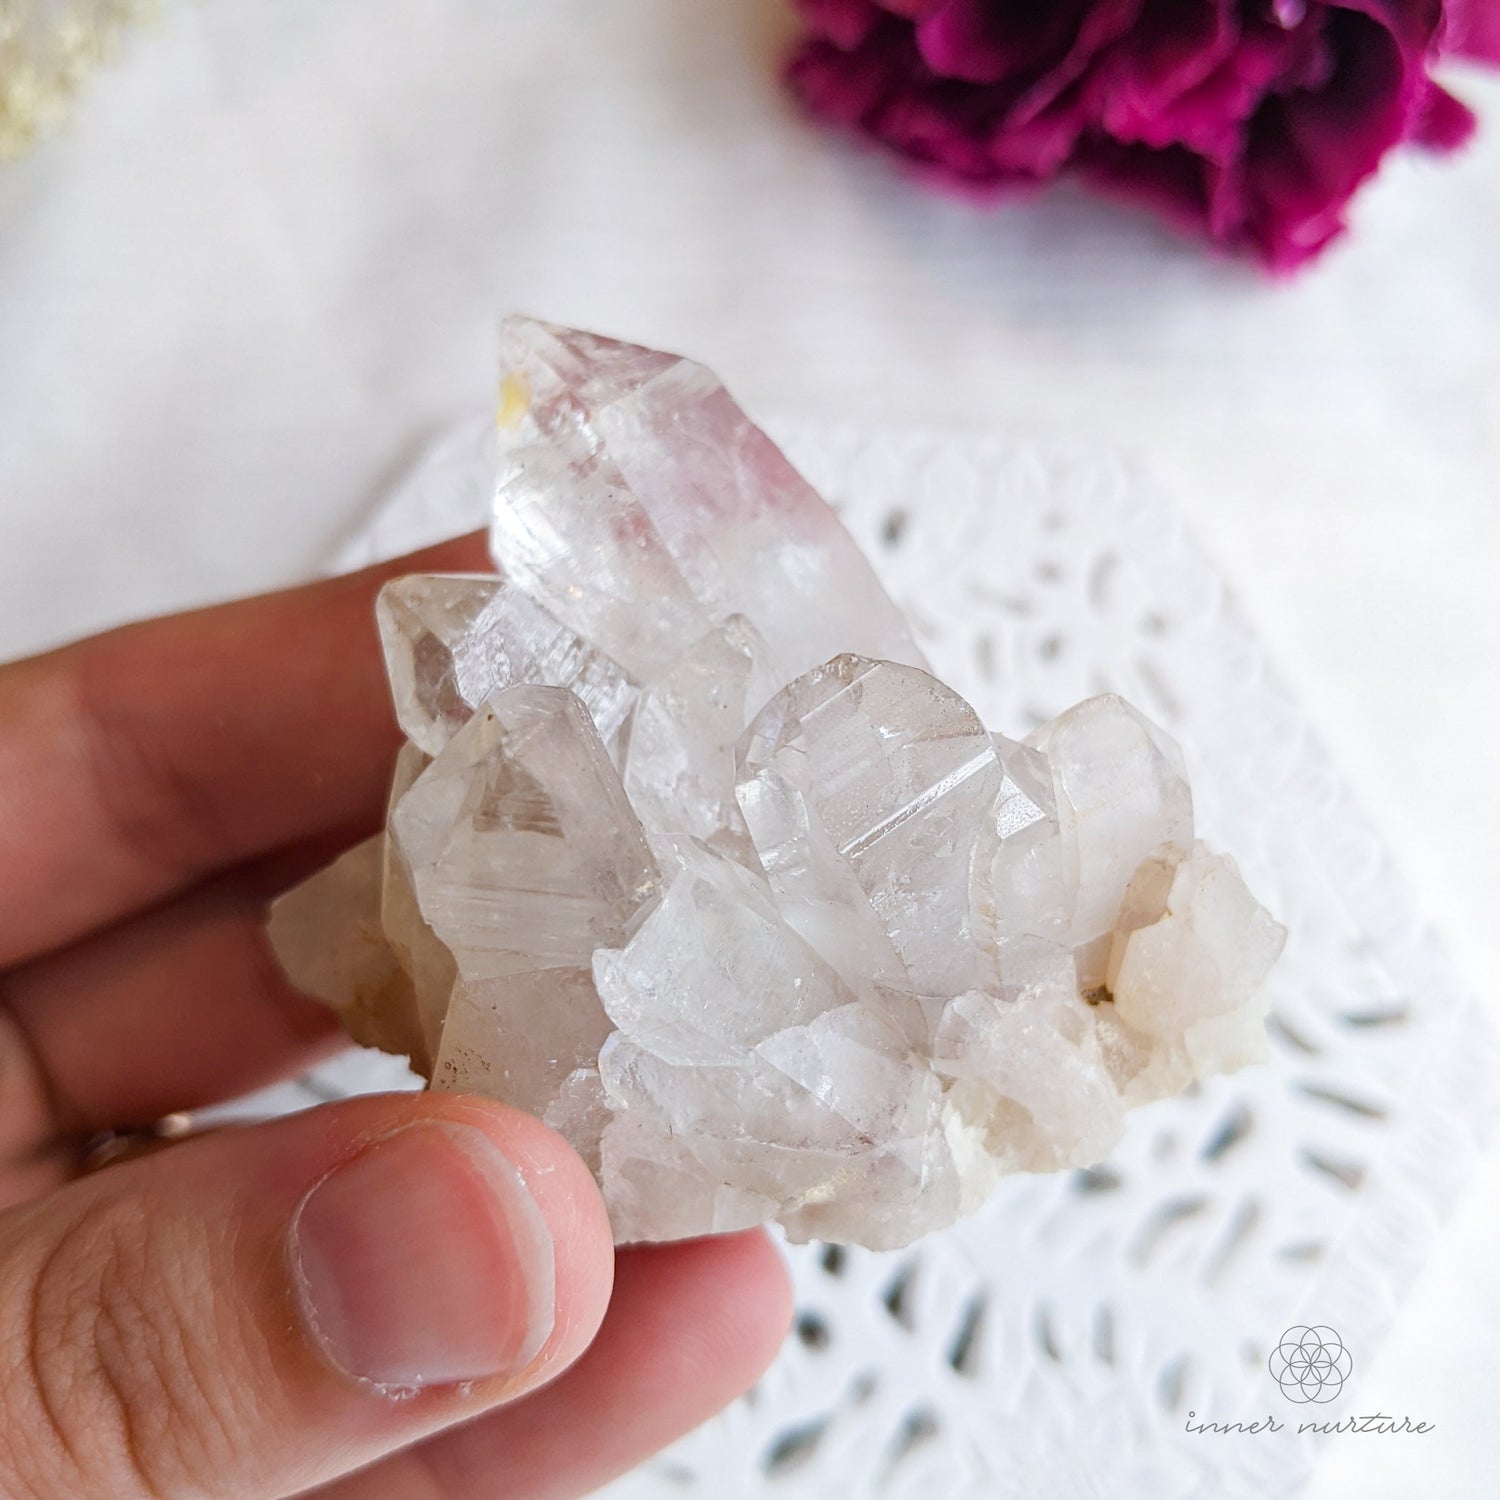 Crystals For Intuition